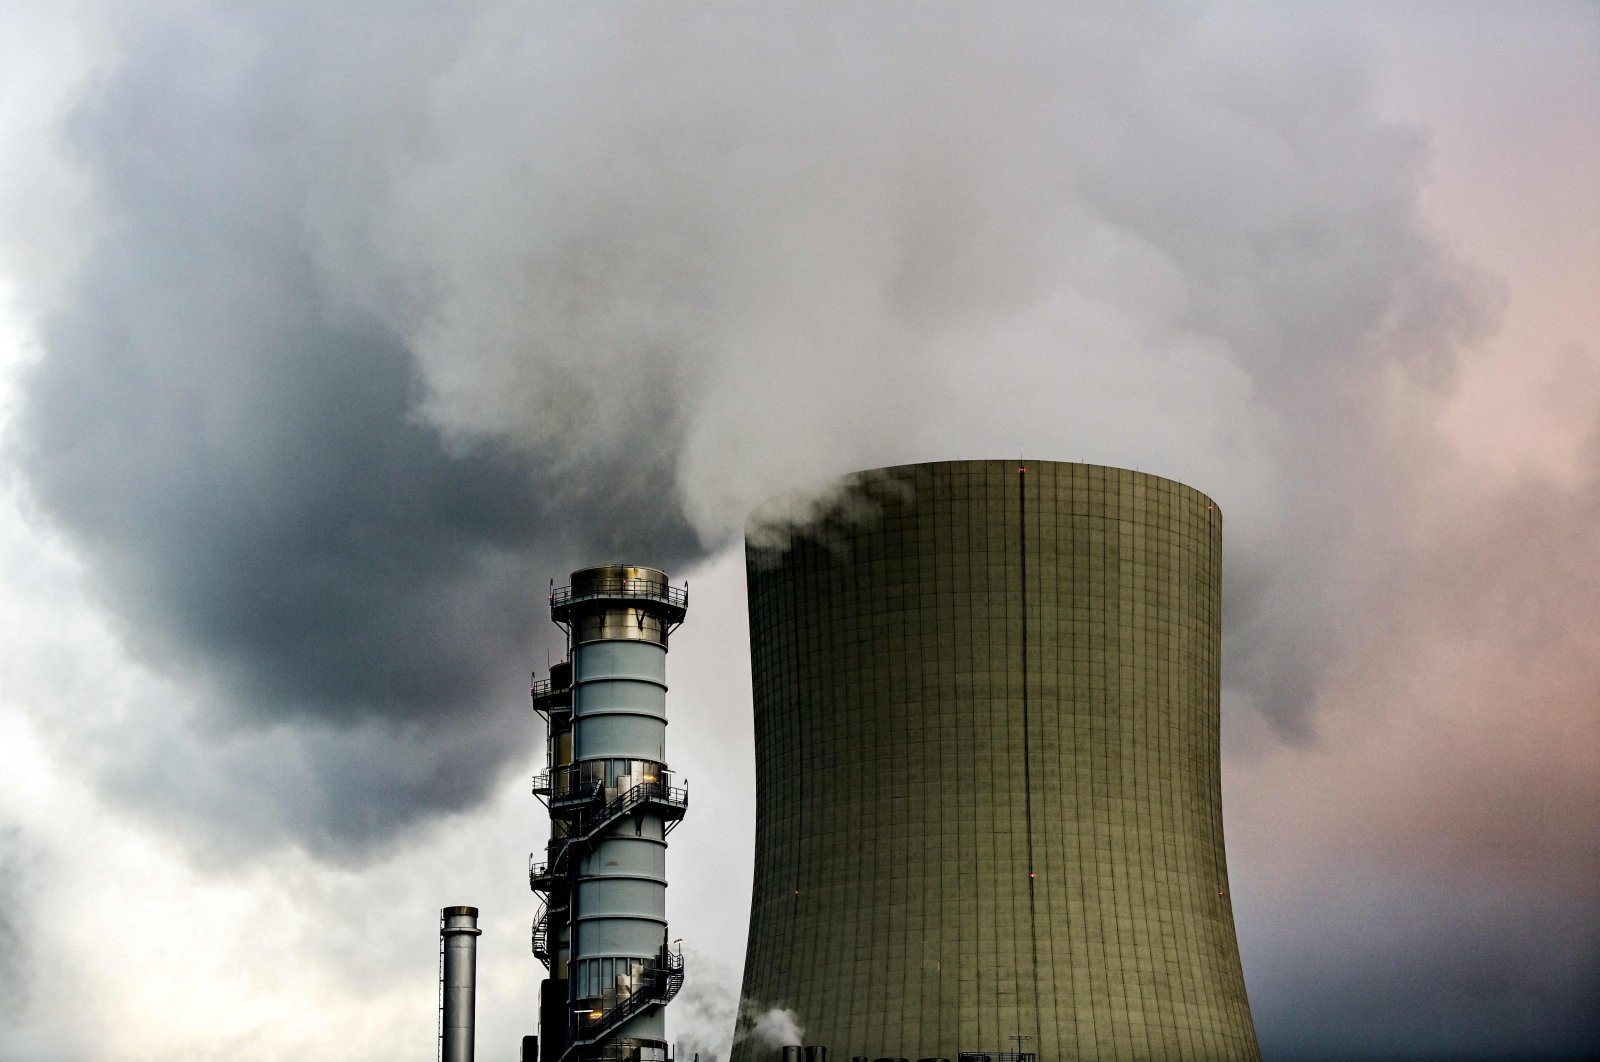 A view shows the cooling tower of a gas-fired power plant in Lingen, western Germany, Jan. 12, 2022. (AFP Photo)